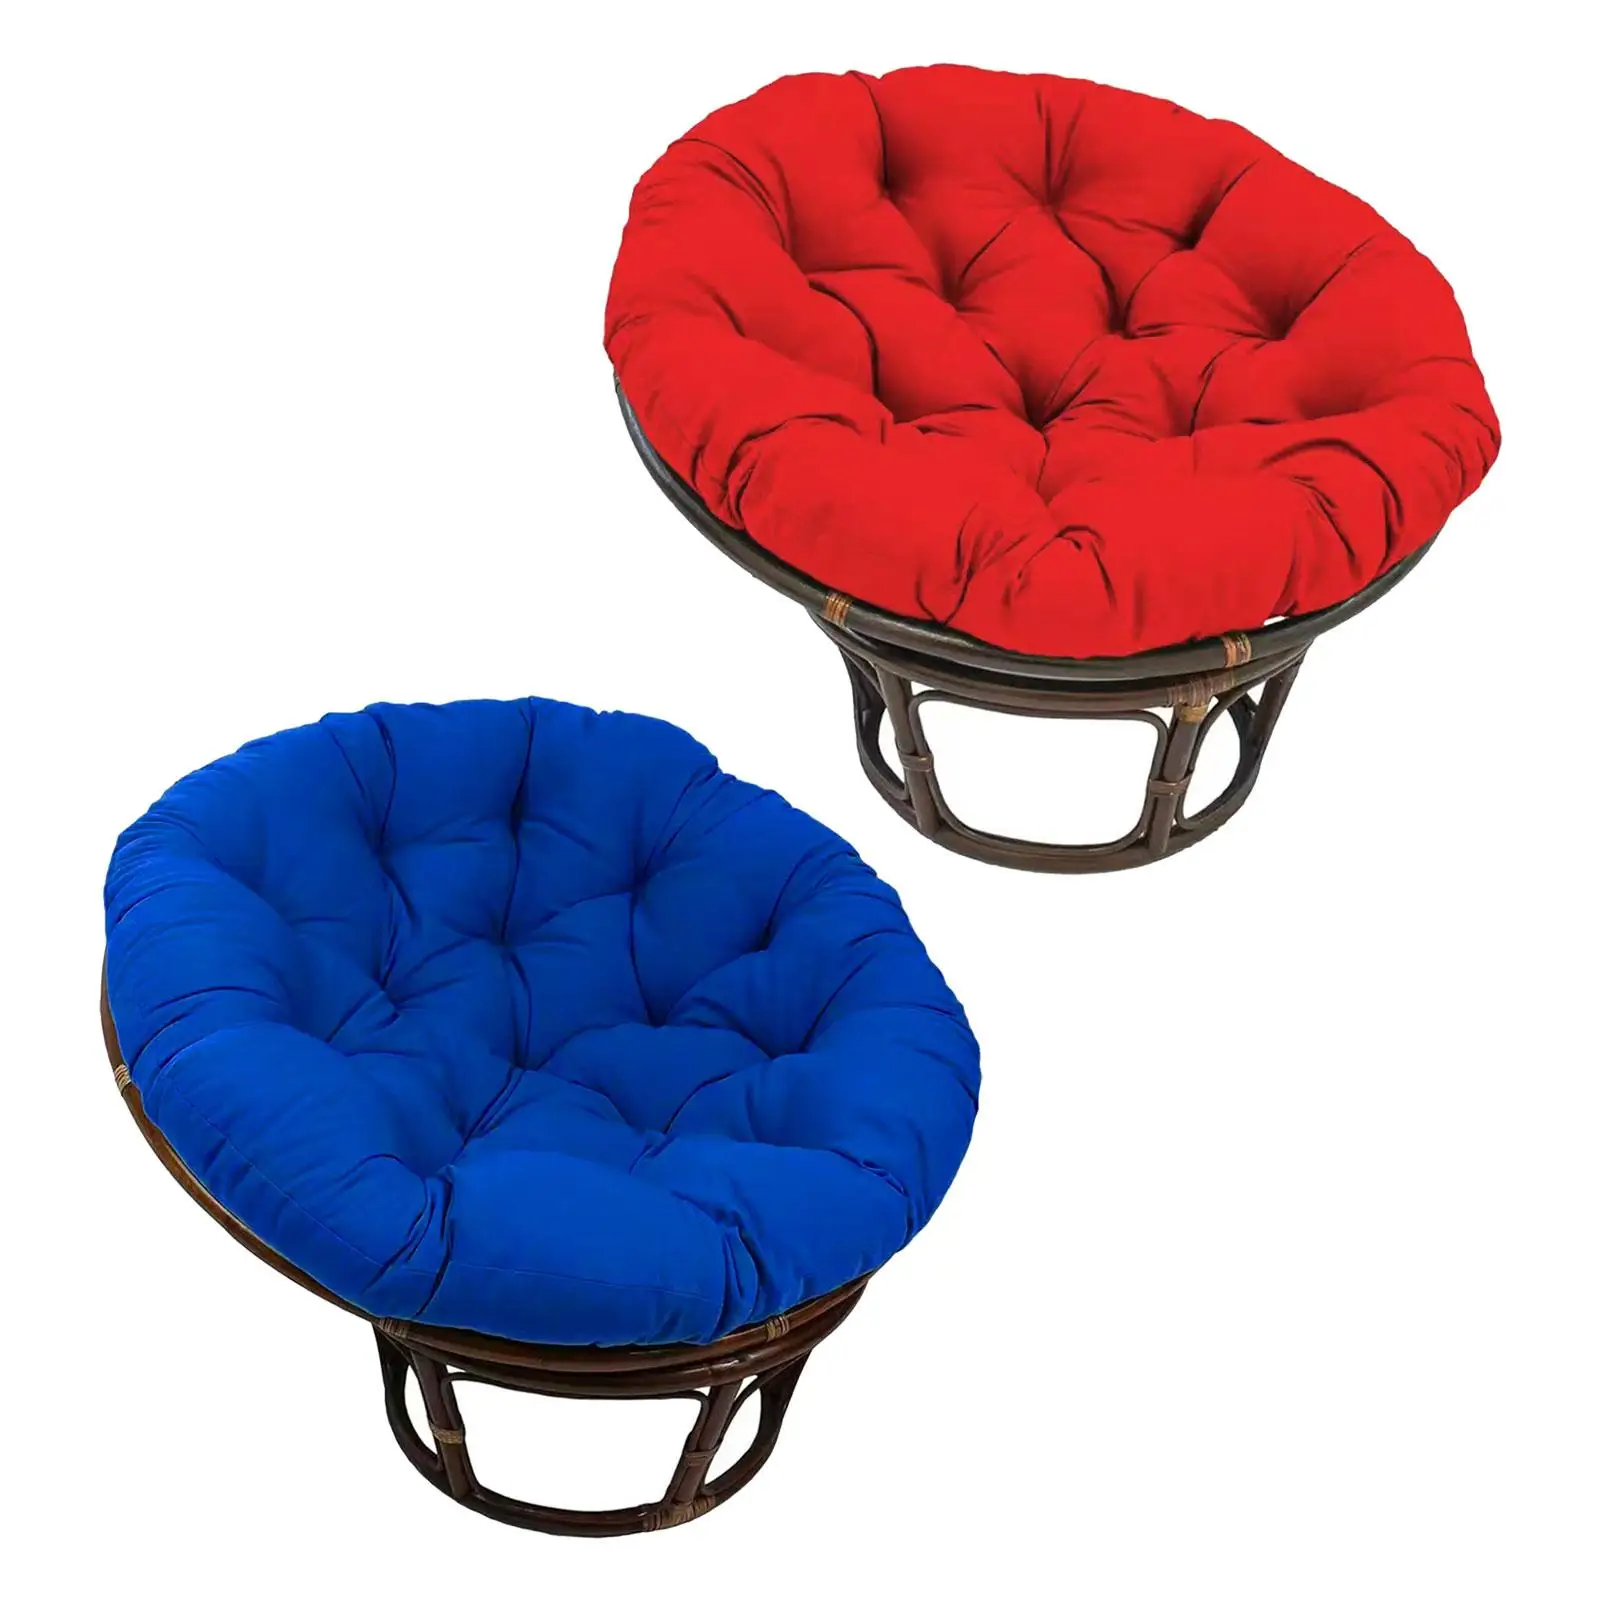 Egg Chair Cushion for Hanging Beds Hammock Chair Indoor or Outdoor Swing Chairs Garden Offices Hanging Baskets